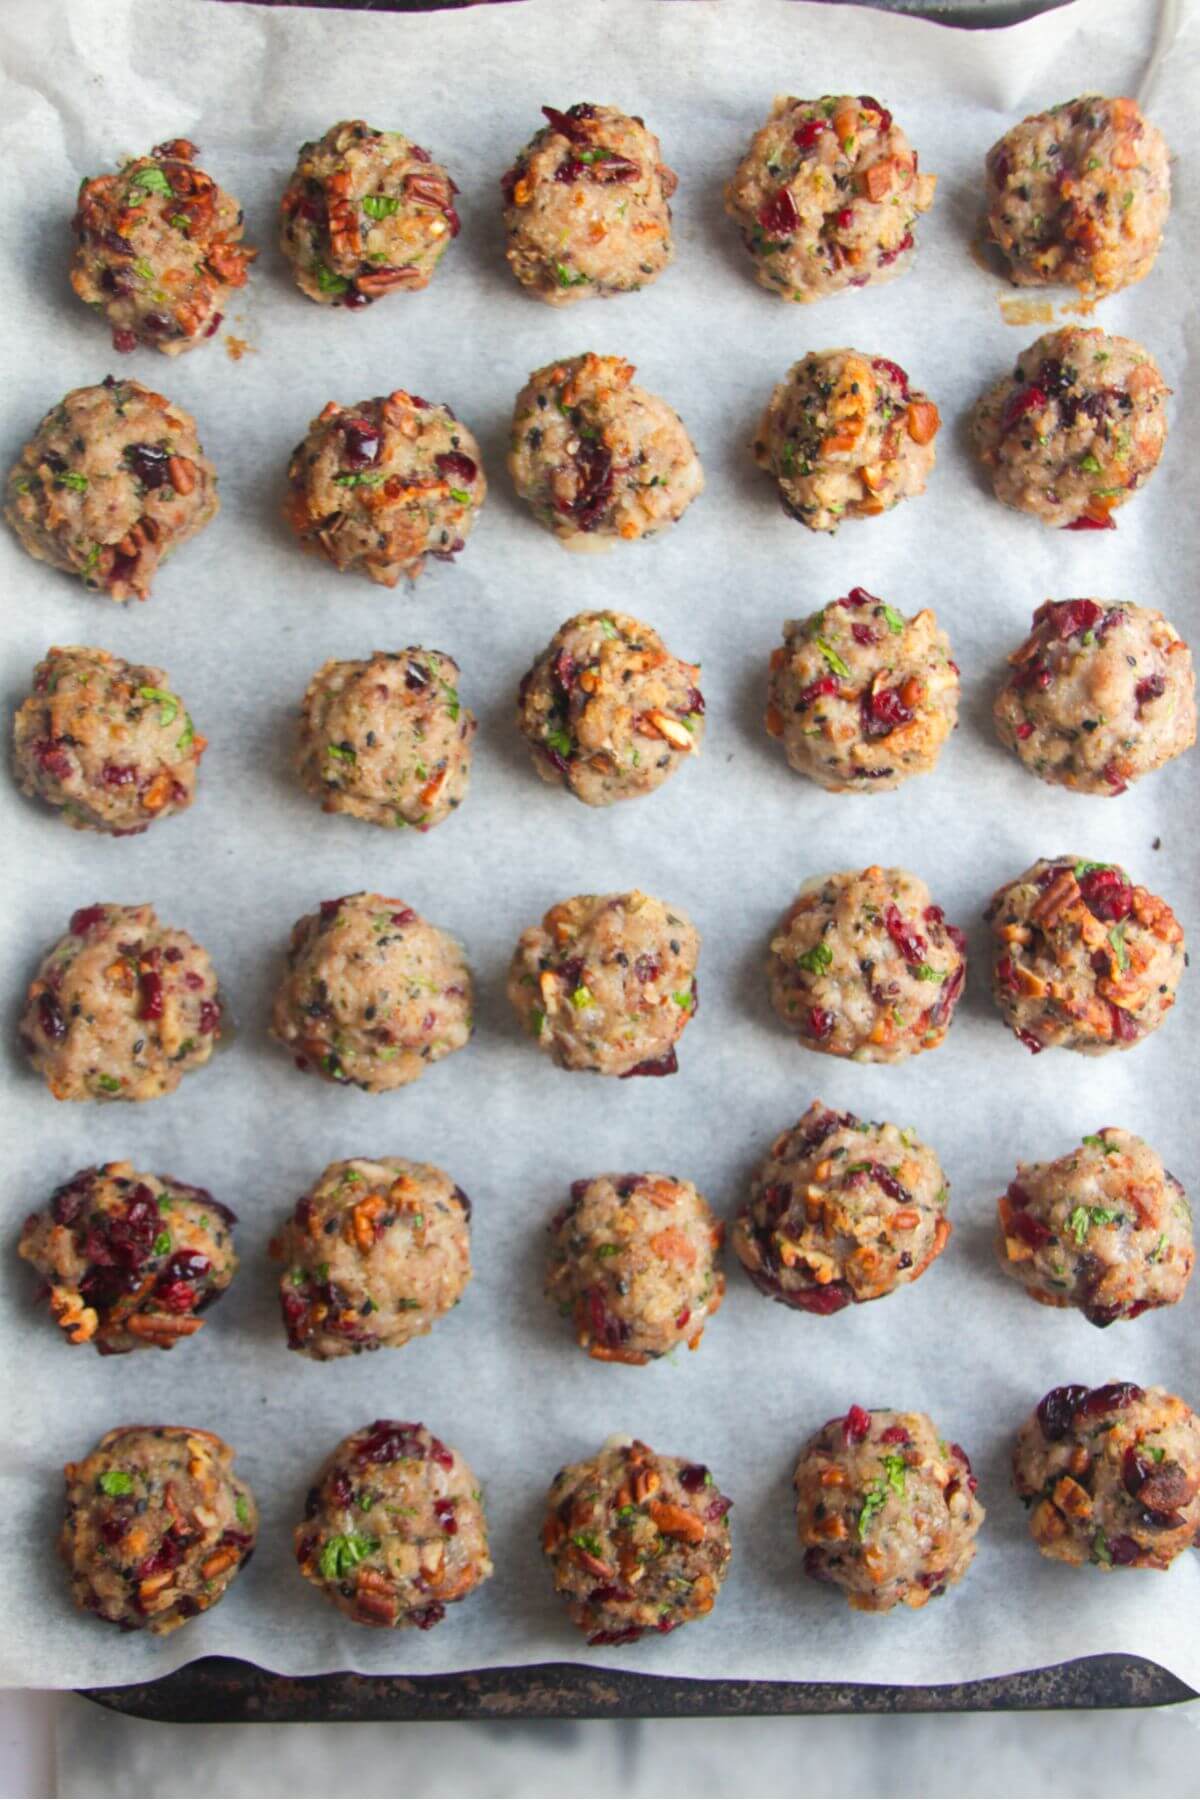 Cooked stuffing balls laid out on a baking paper lined tray.